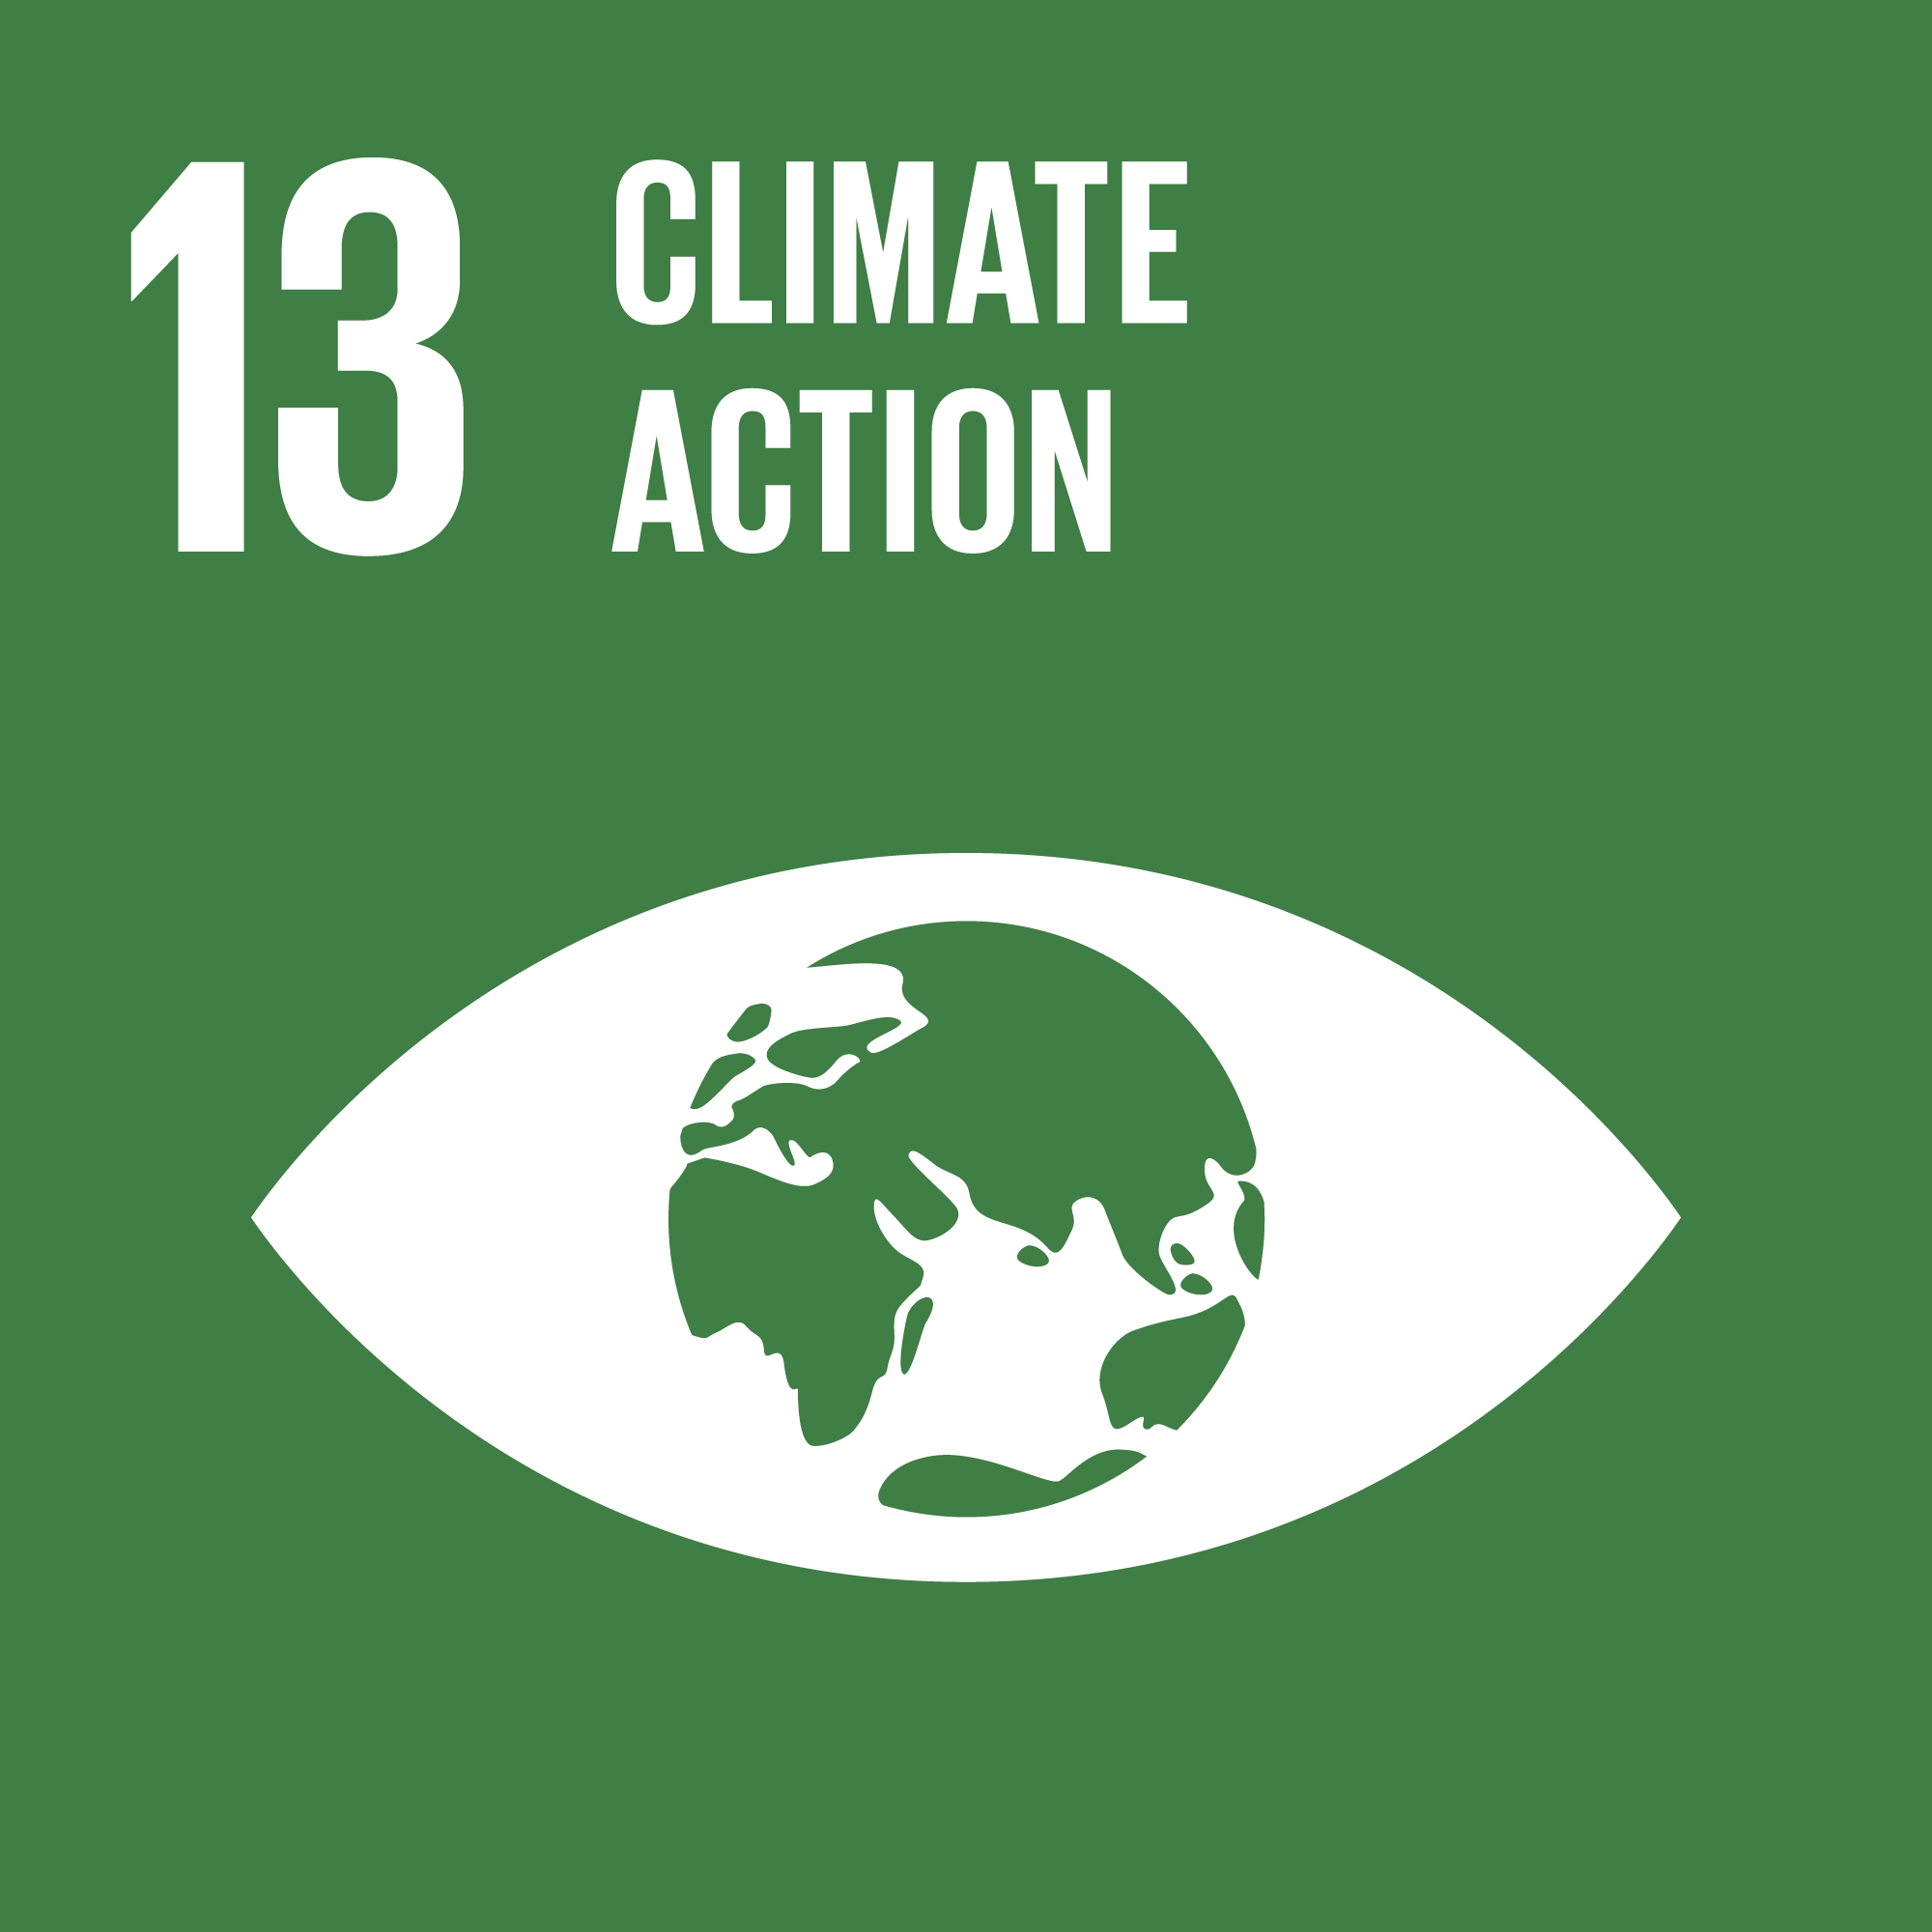 Agenda 2030 goal number 13: climate action